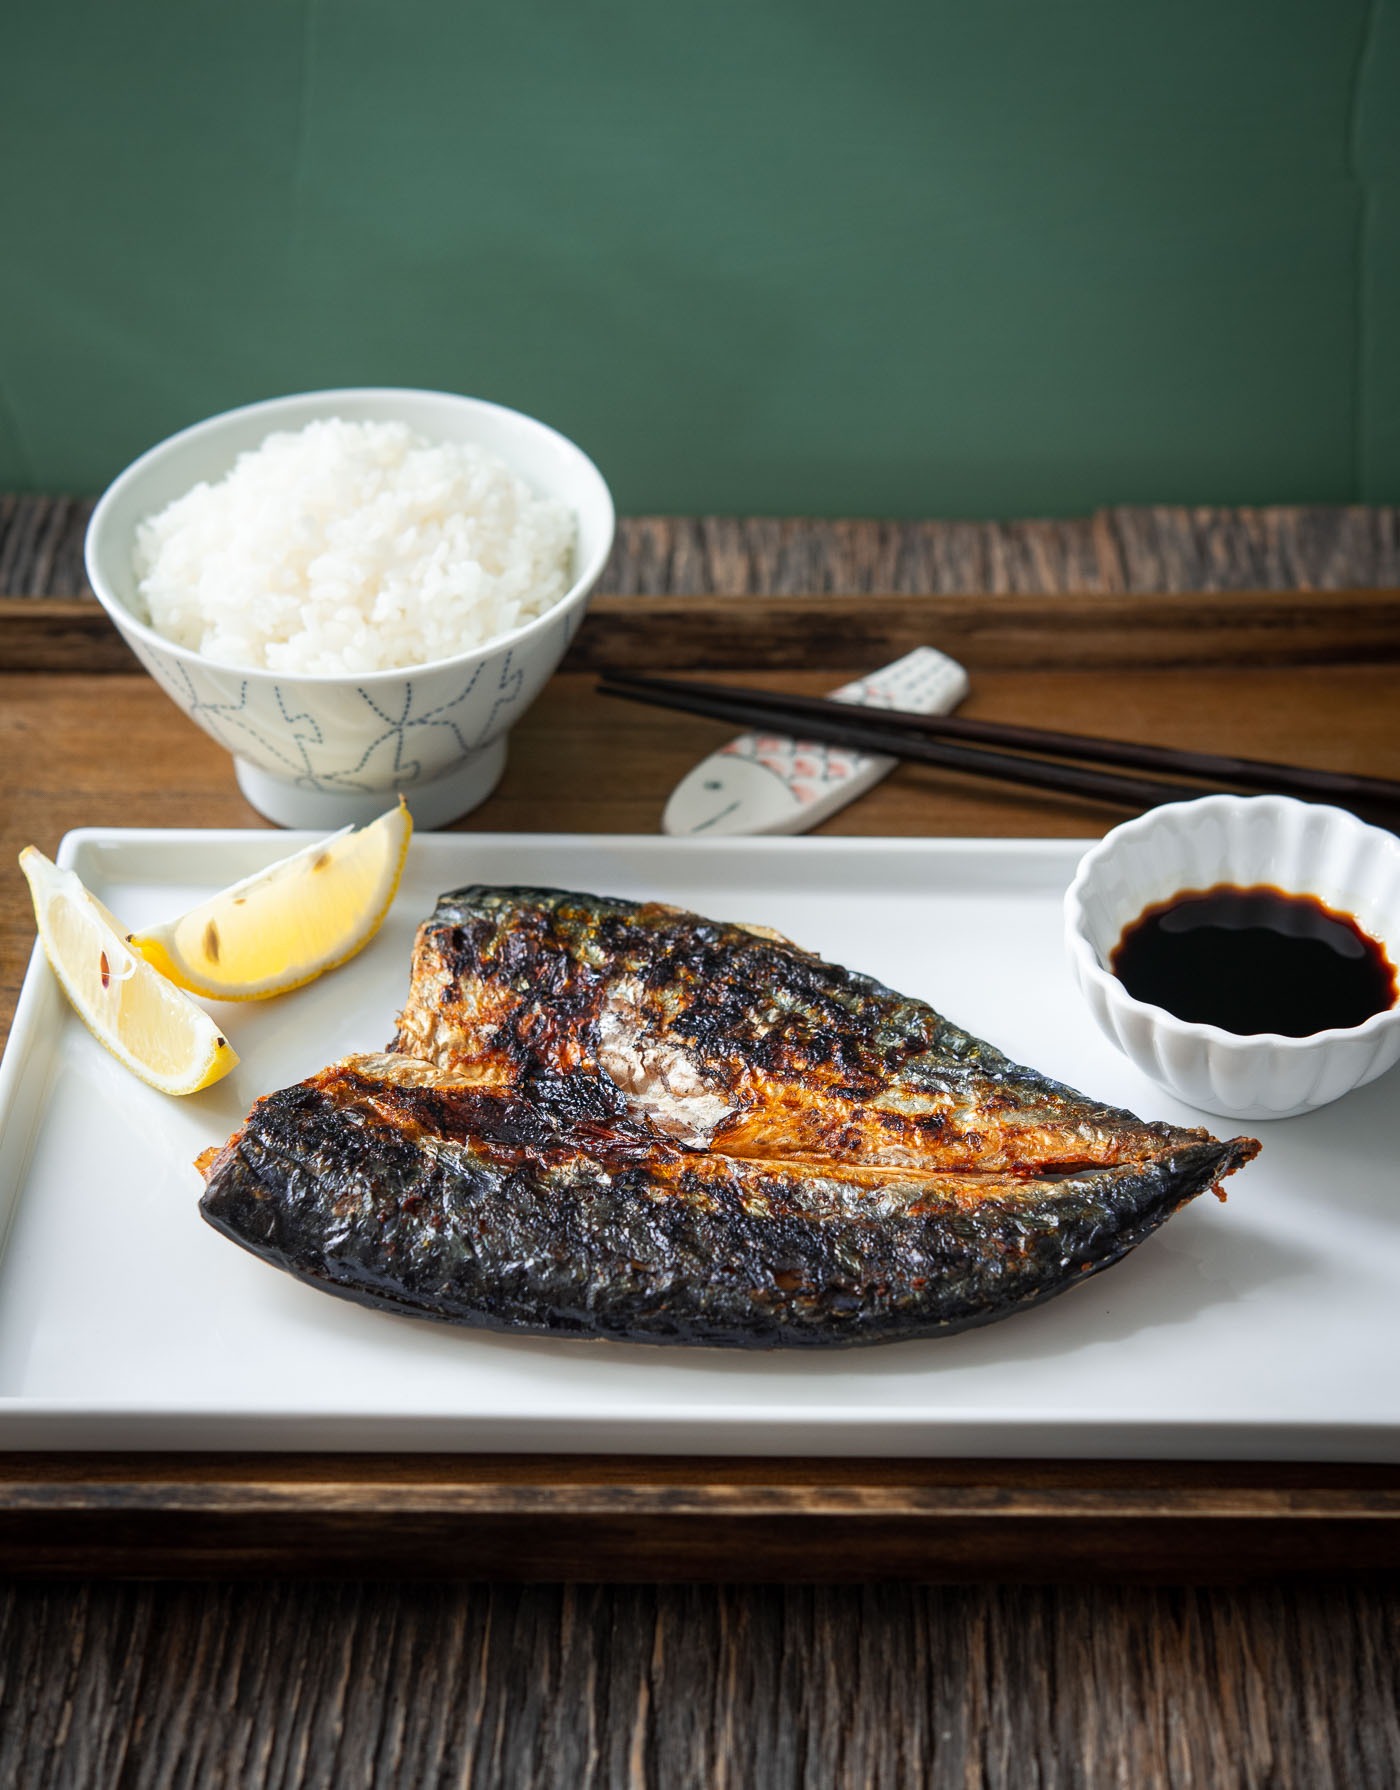 Grilled mackerel fish on a plate with soy sauce, lemon wedges, and served with rice.